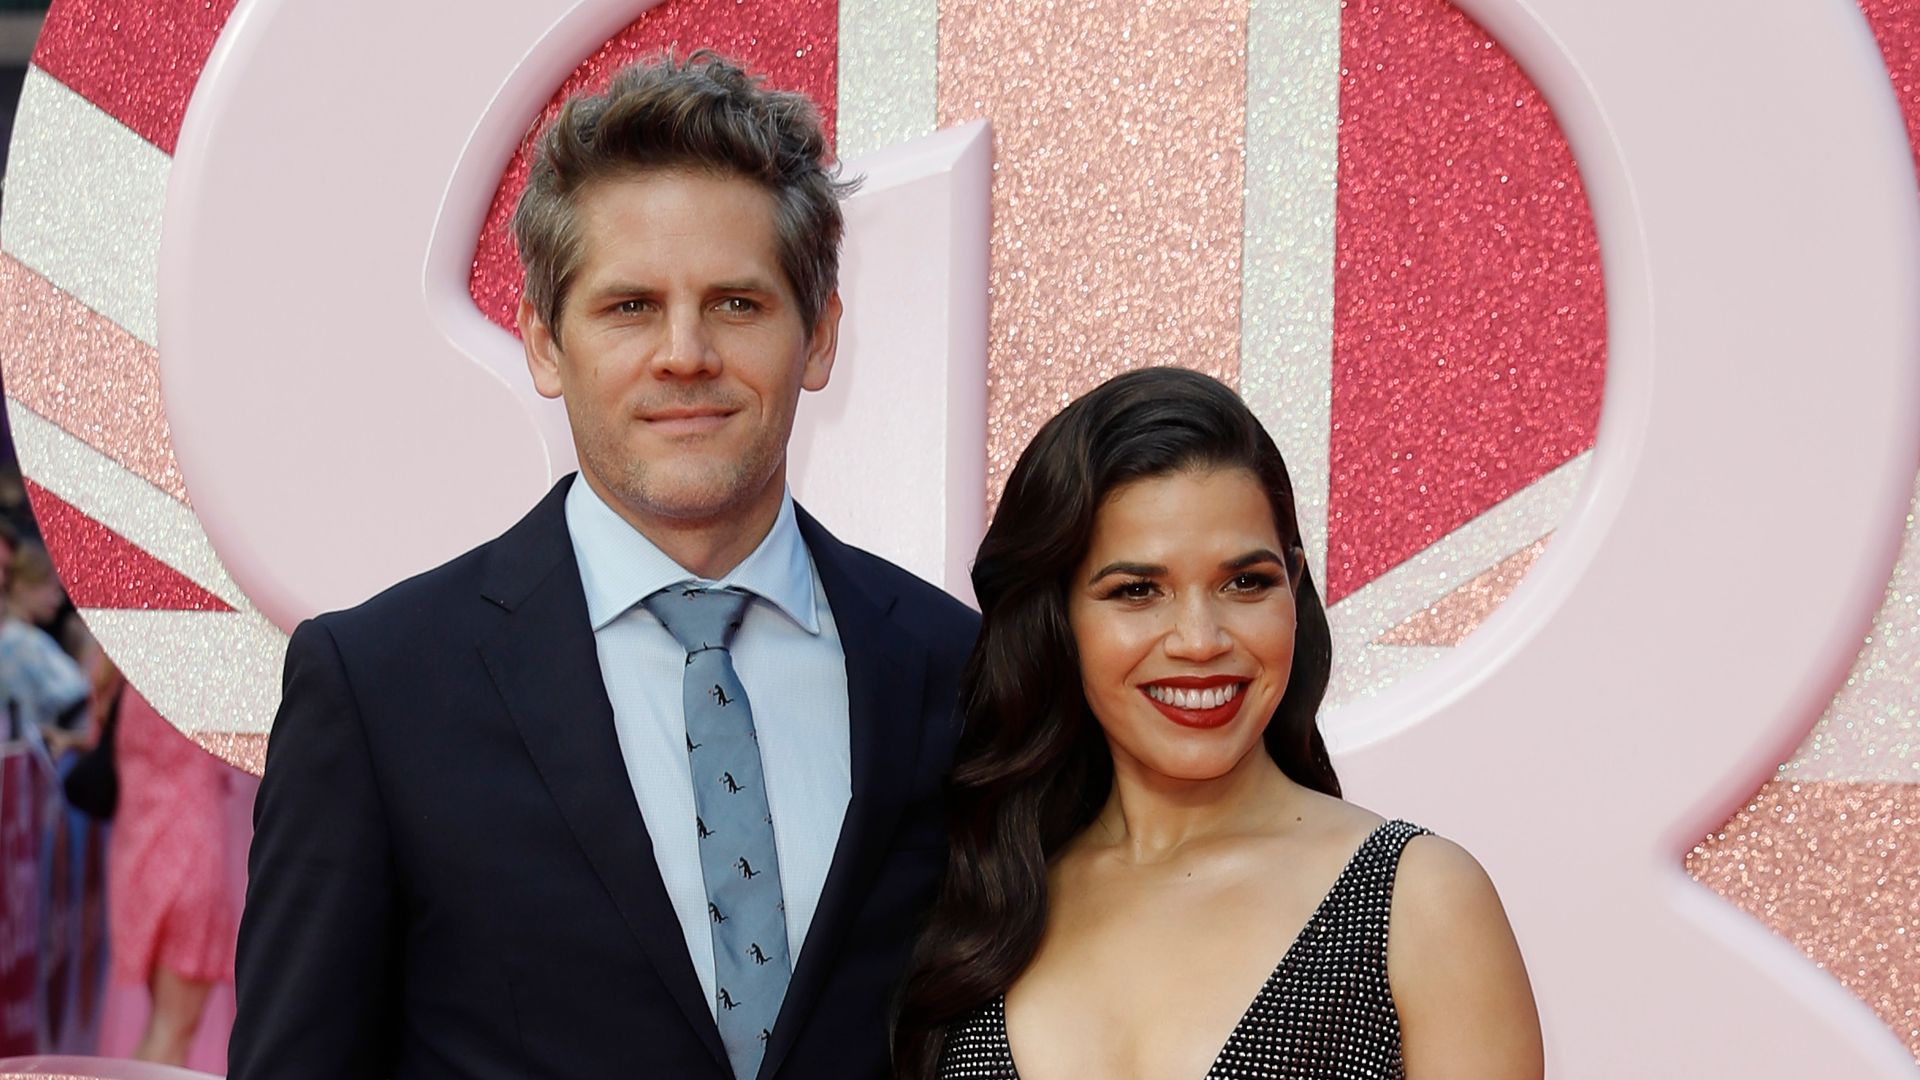 Ryan Piers Williams and America Ferrera attend The European Premiere Of "Barbie" at Cineworld Leicester Square on July 12, 2023 in London, England